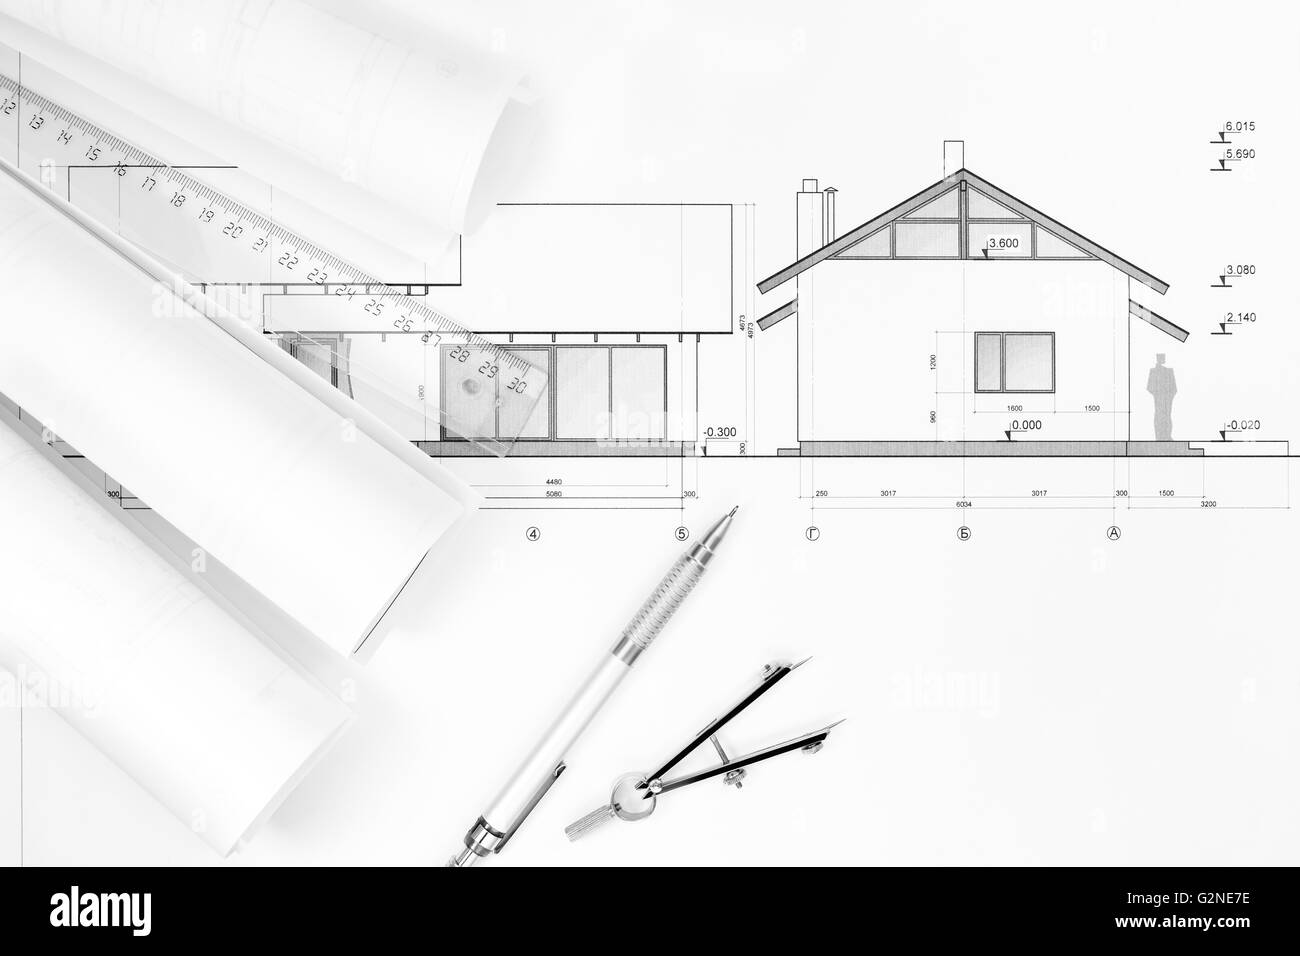 Architectural project and house plan blueprints rolled up Stock Photo